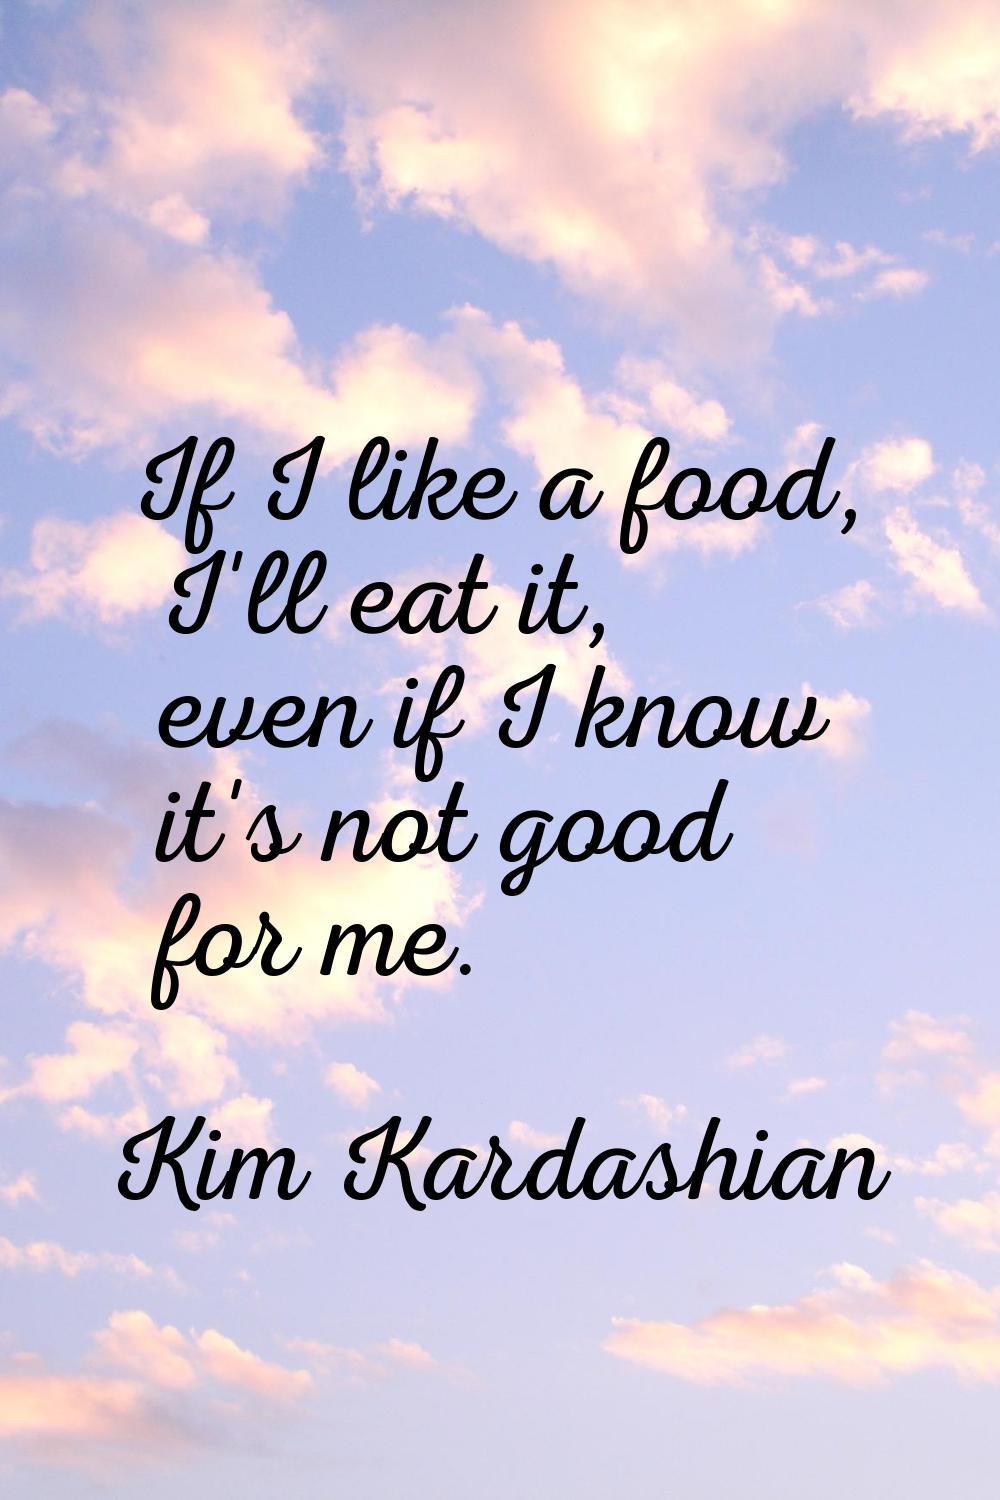 If I like a food, I'll eat it, even if I know it's not good for me.